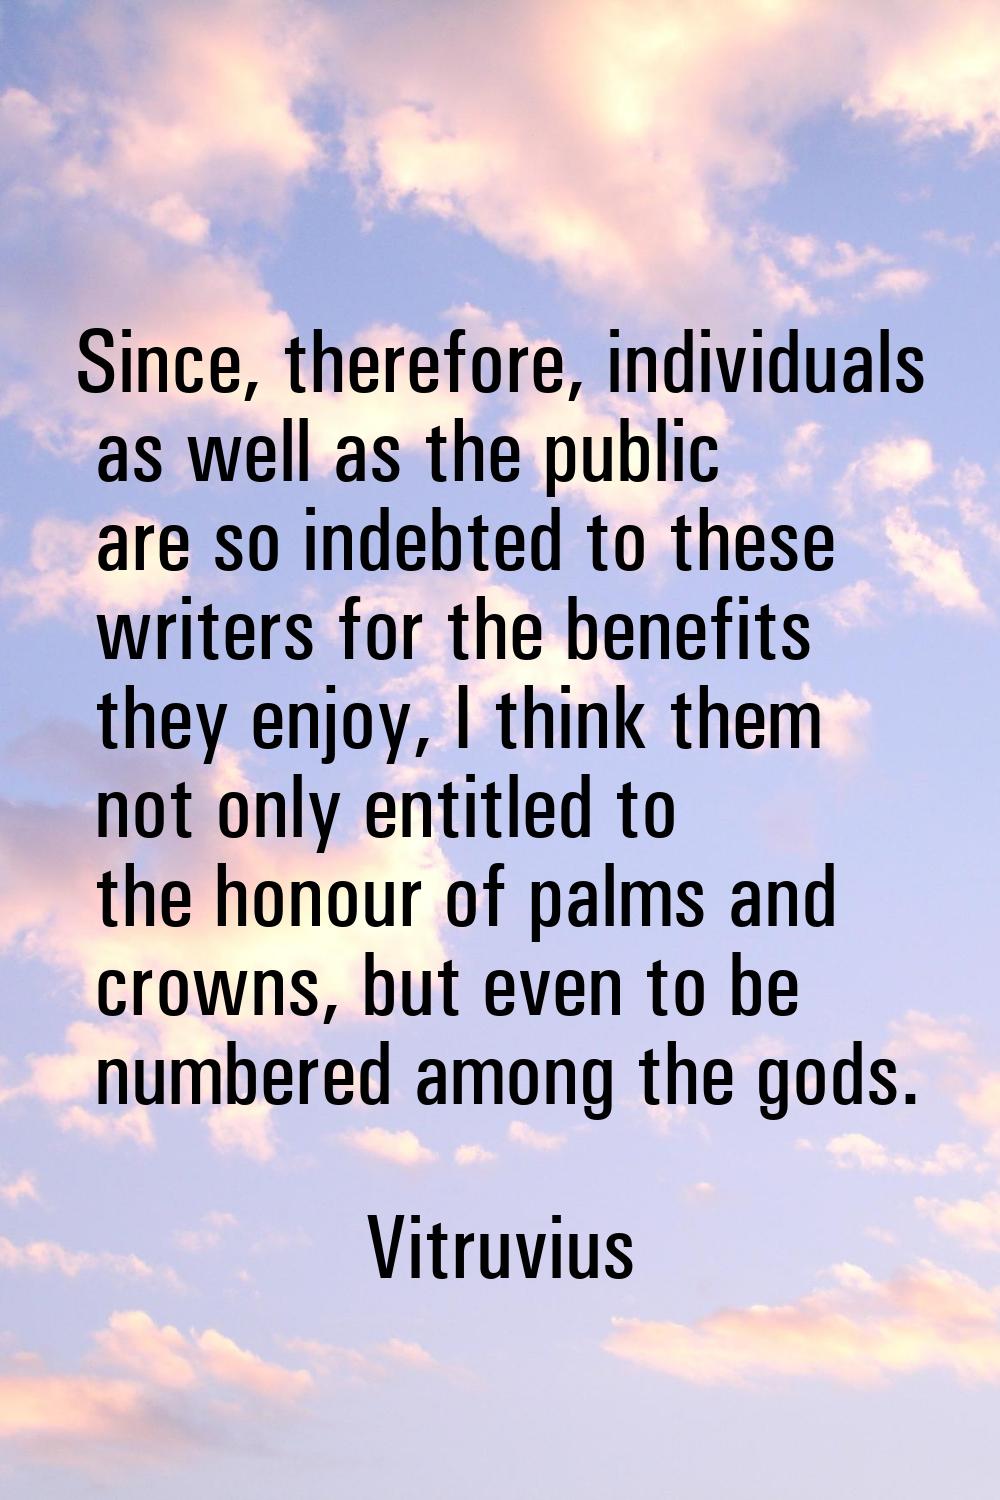 Since, therefore, individuals as well as the public are so indebted to these writers for the benefi